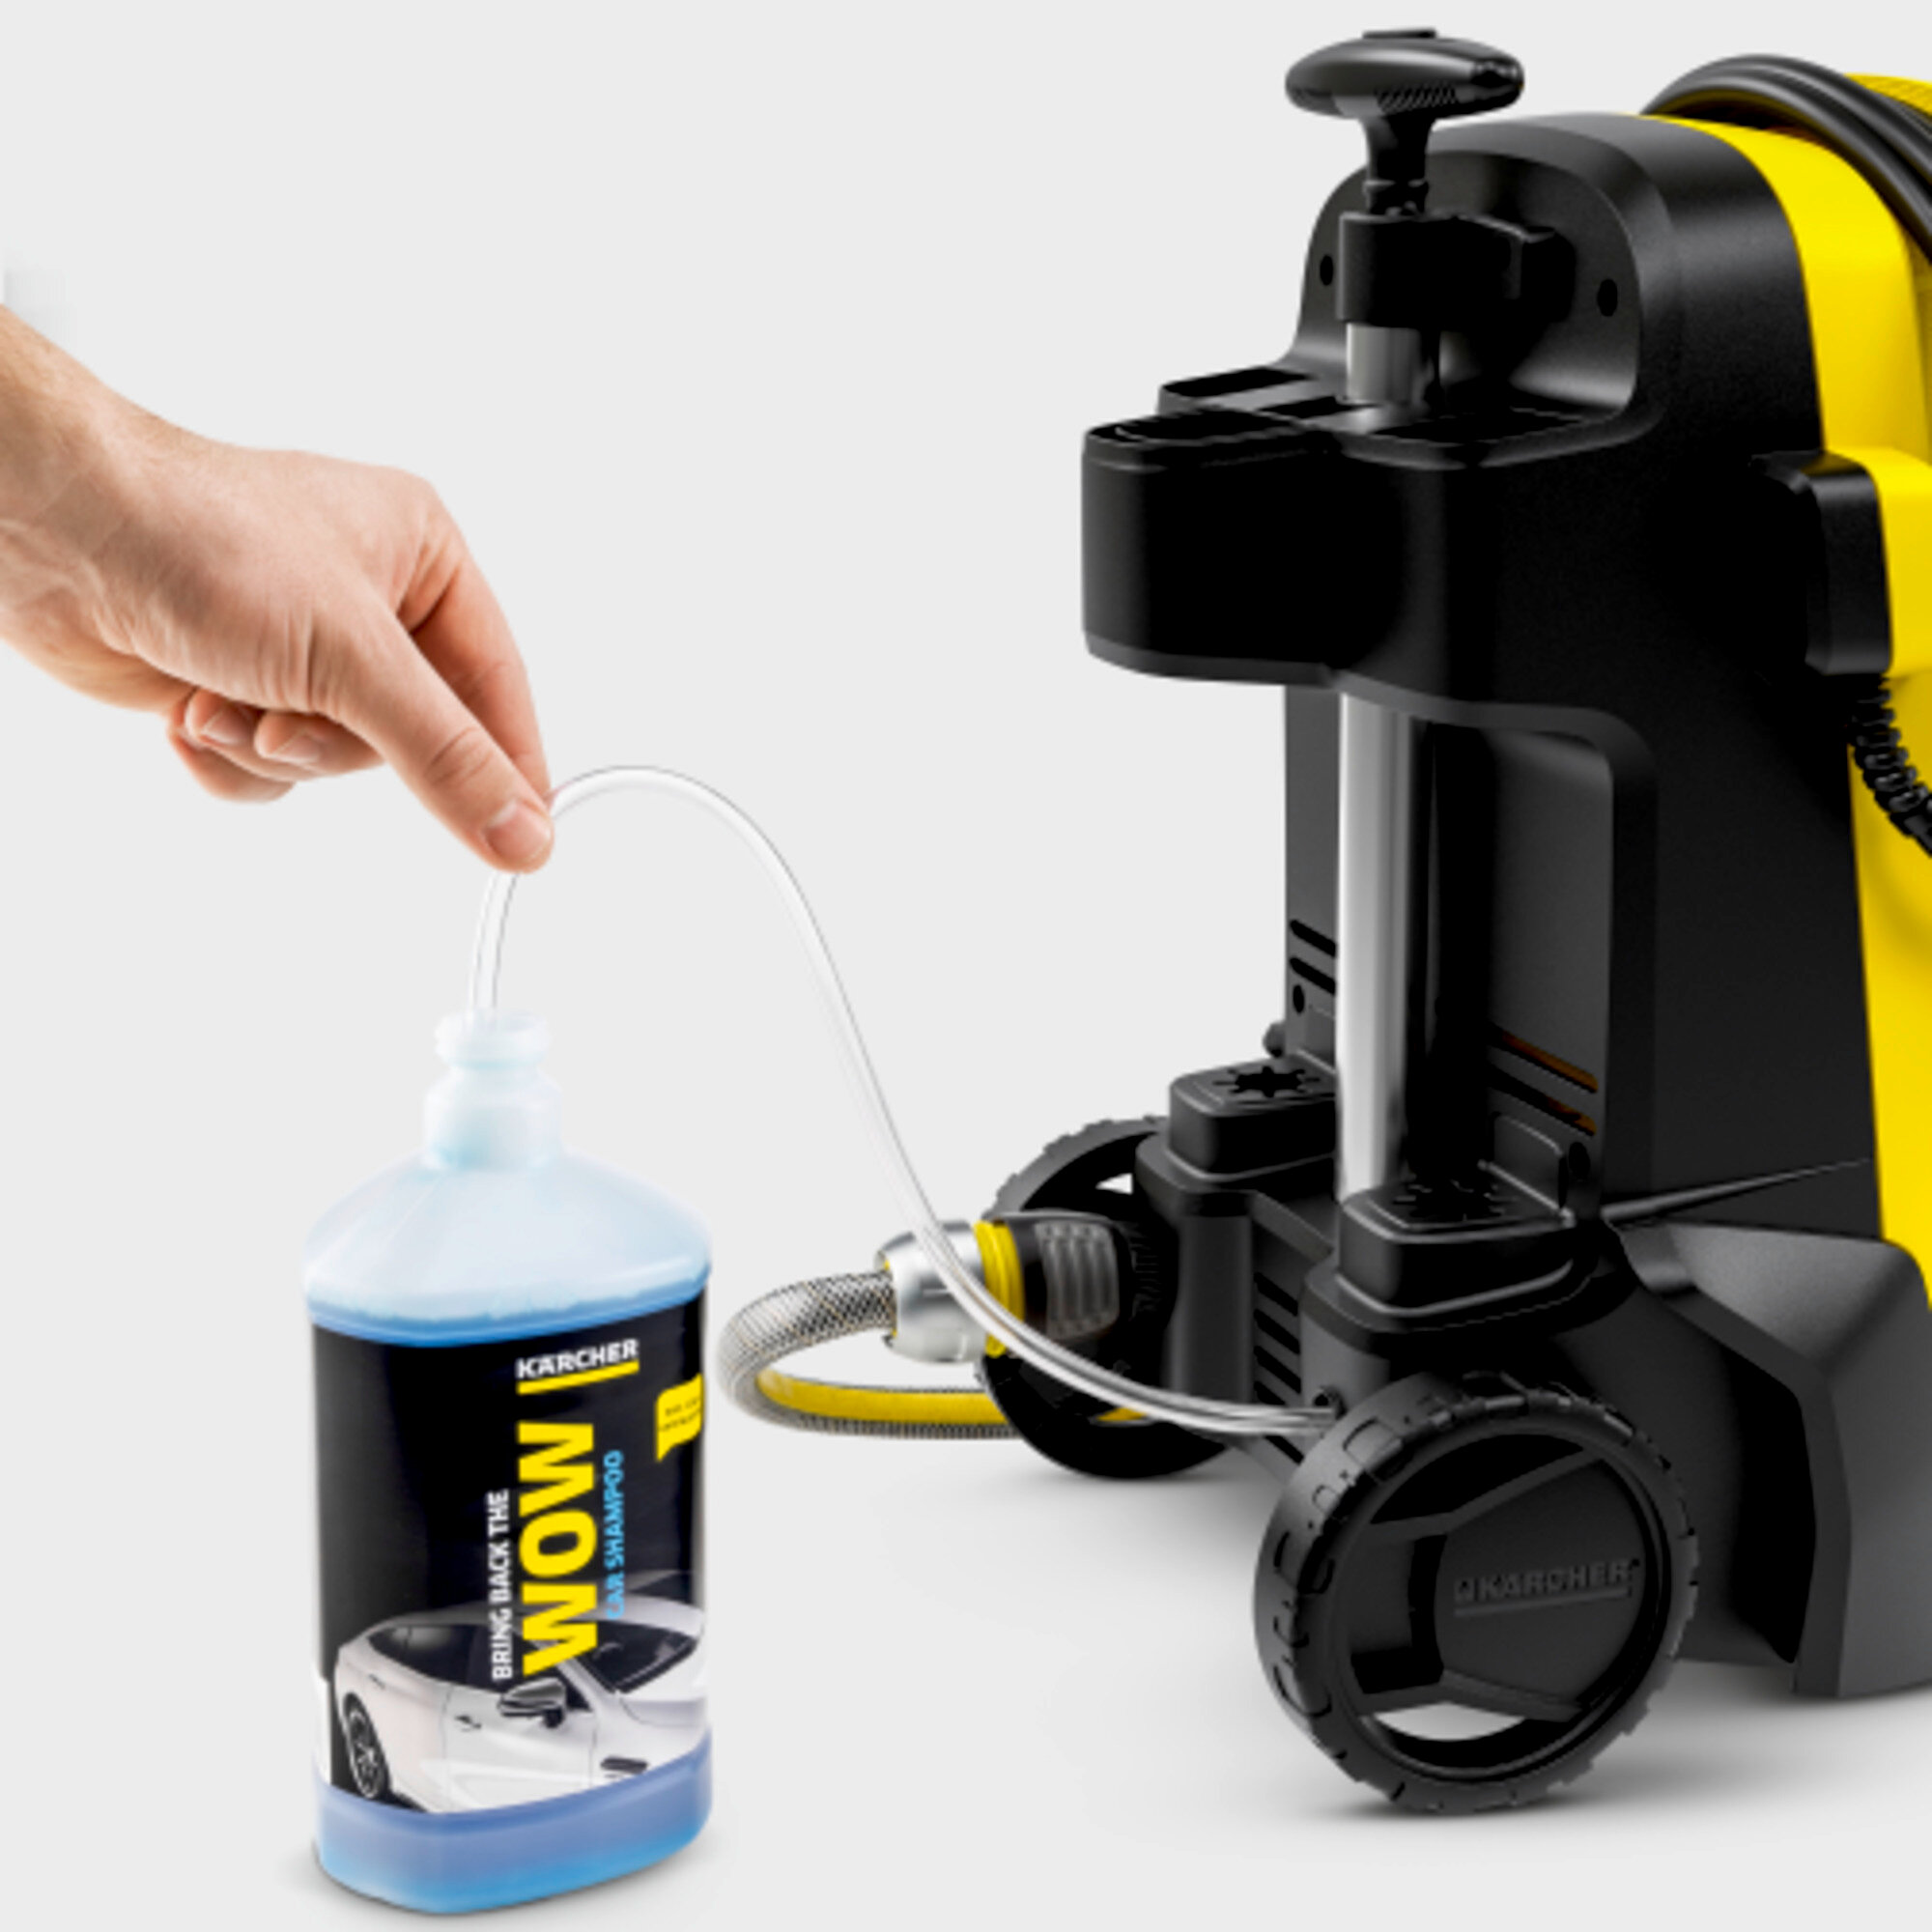 High Pressure Washer K 5 Classic: Detergent use